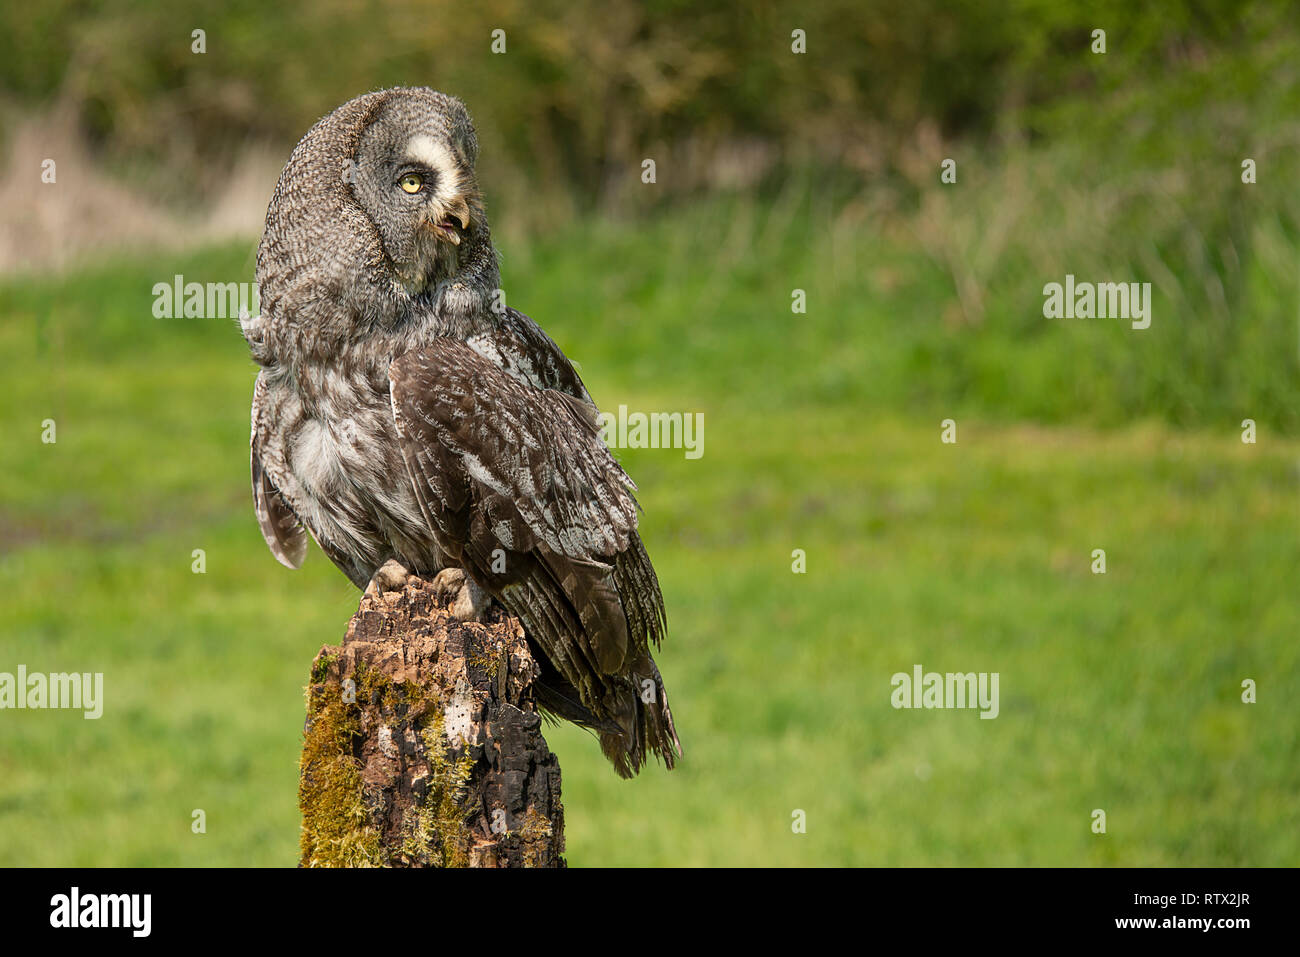 A great grey gray owl perched on an old tree stump in the middle of a filed. It is looking to the right into copyspace Stock Photo